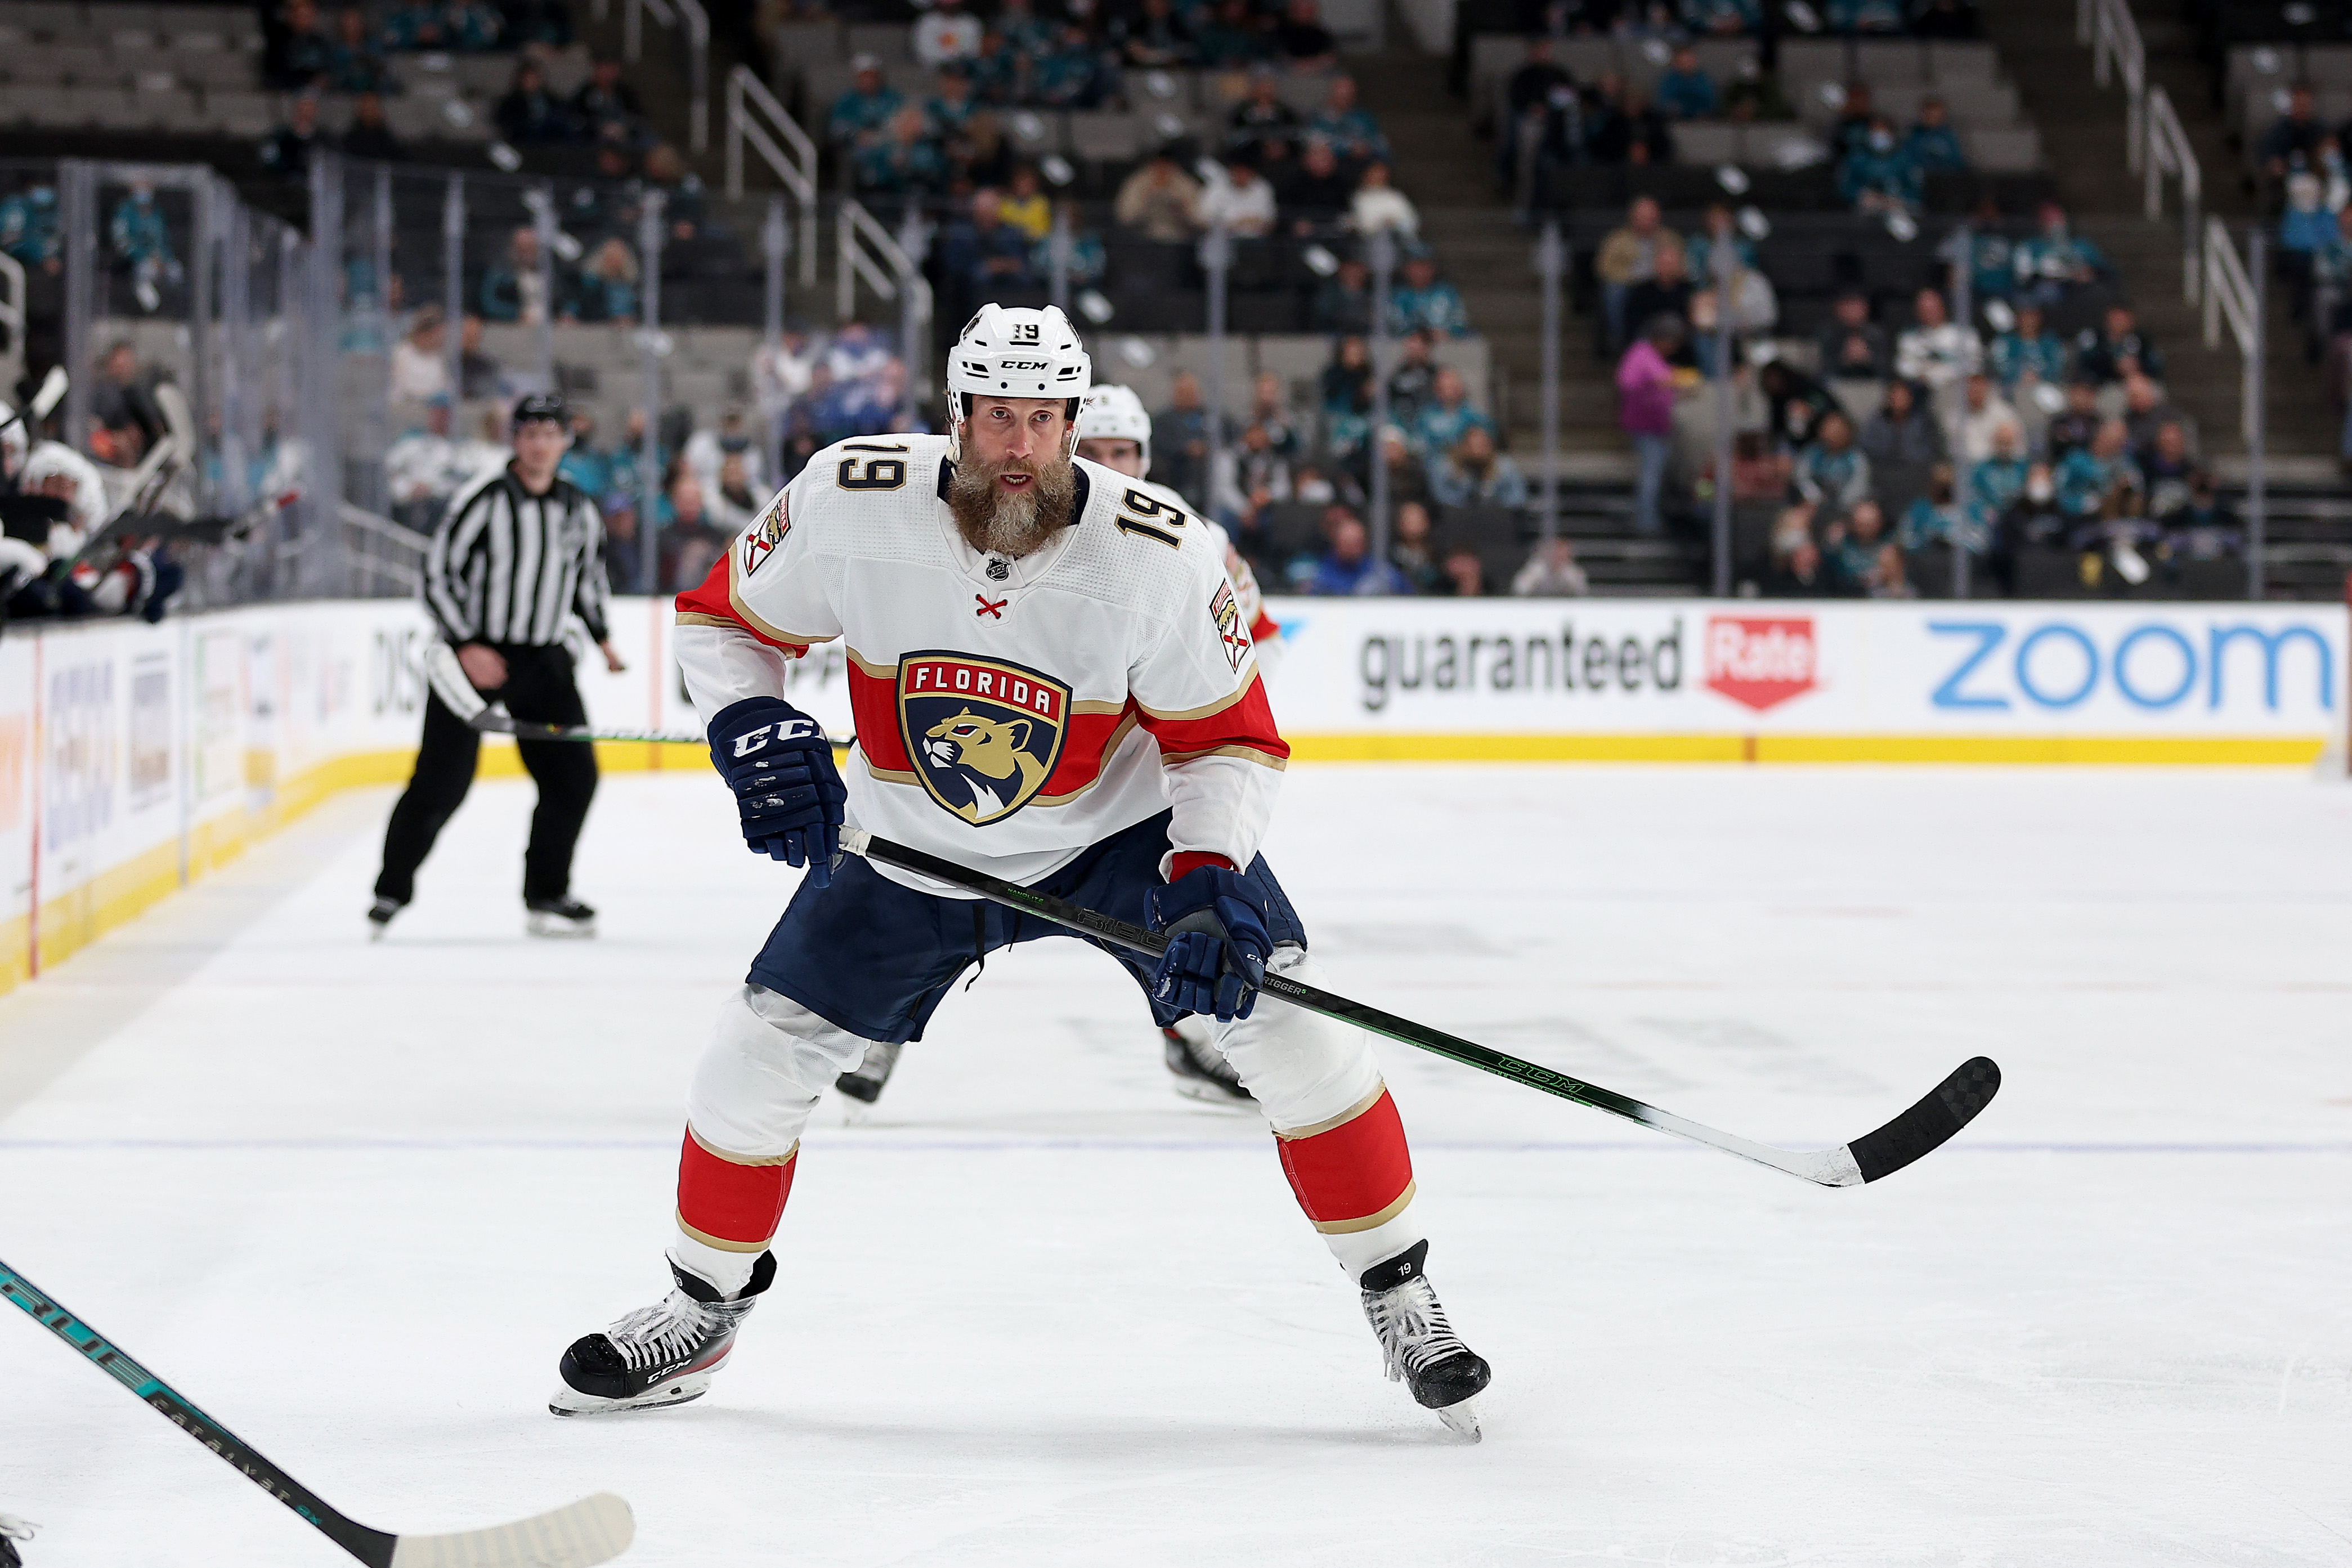 Joe Thornton of the Florida Panthers looks on in the game against the San Jose Sharks at SAP Center in San Jose, California, March 15, 2022 . /CFP